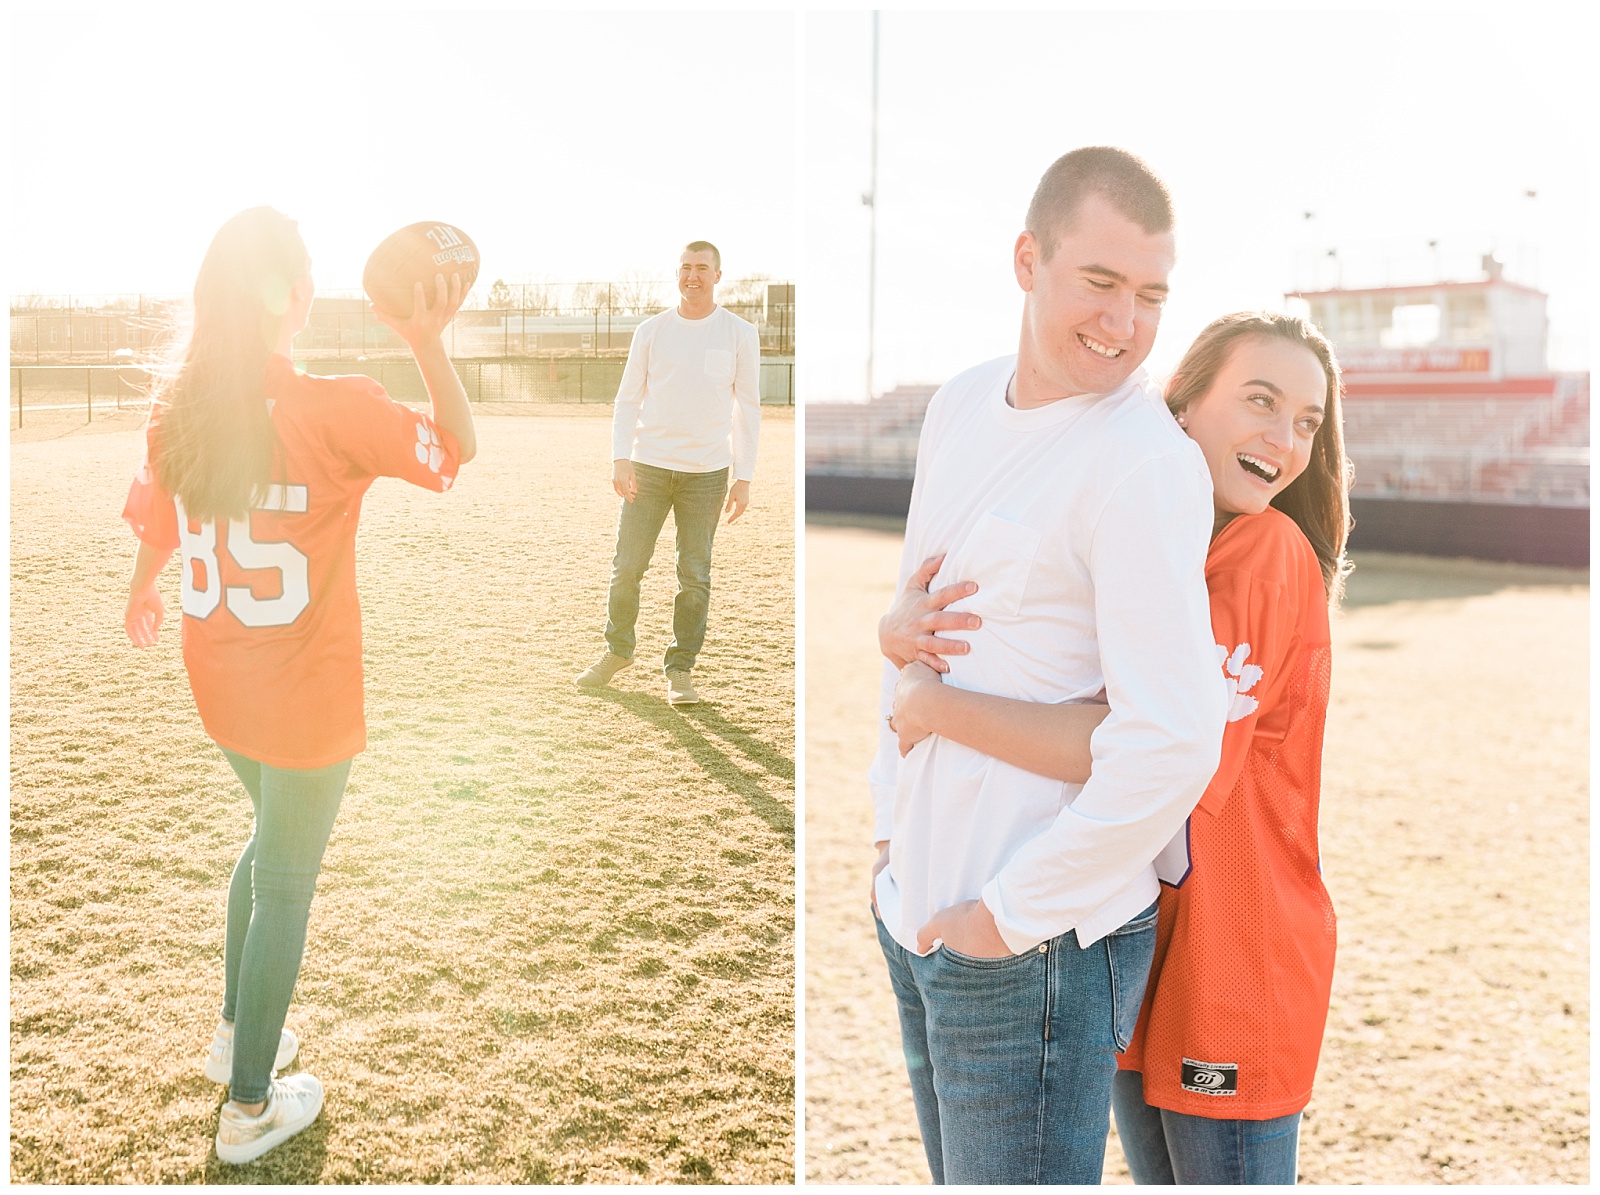 New Jersey, Engagement Session, Wedding Photographer, NFL, Coach, LA Chargers, Football, Athletic, Sporty, Jersey, Play, Golden Hour